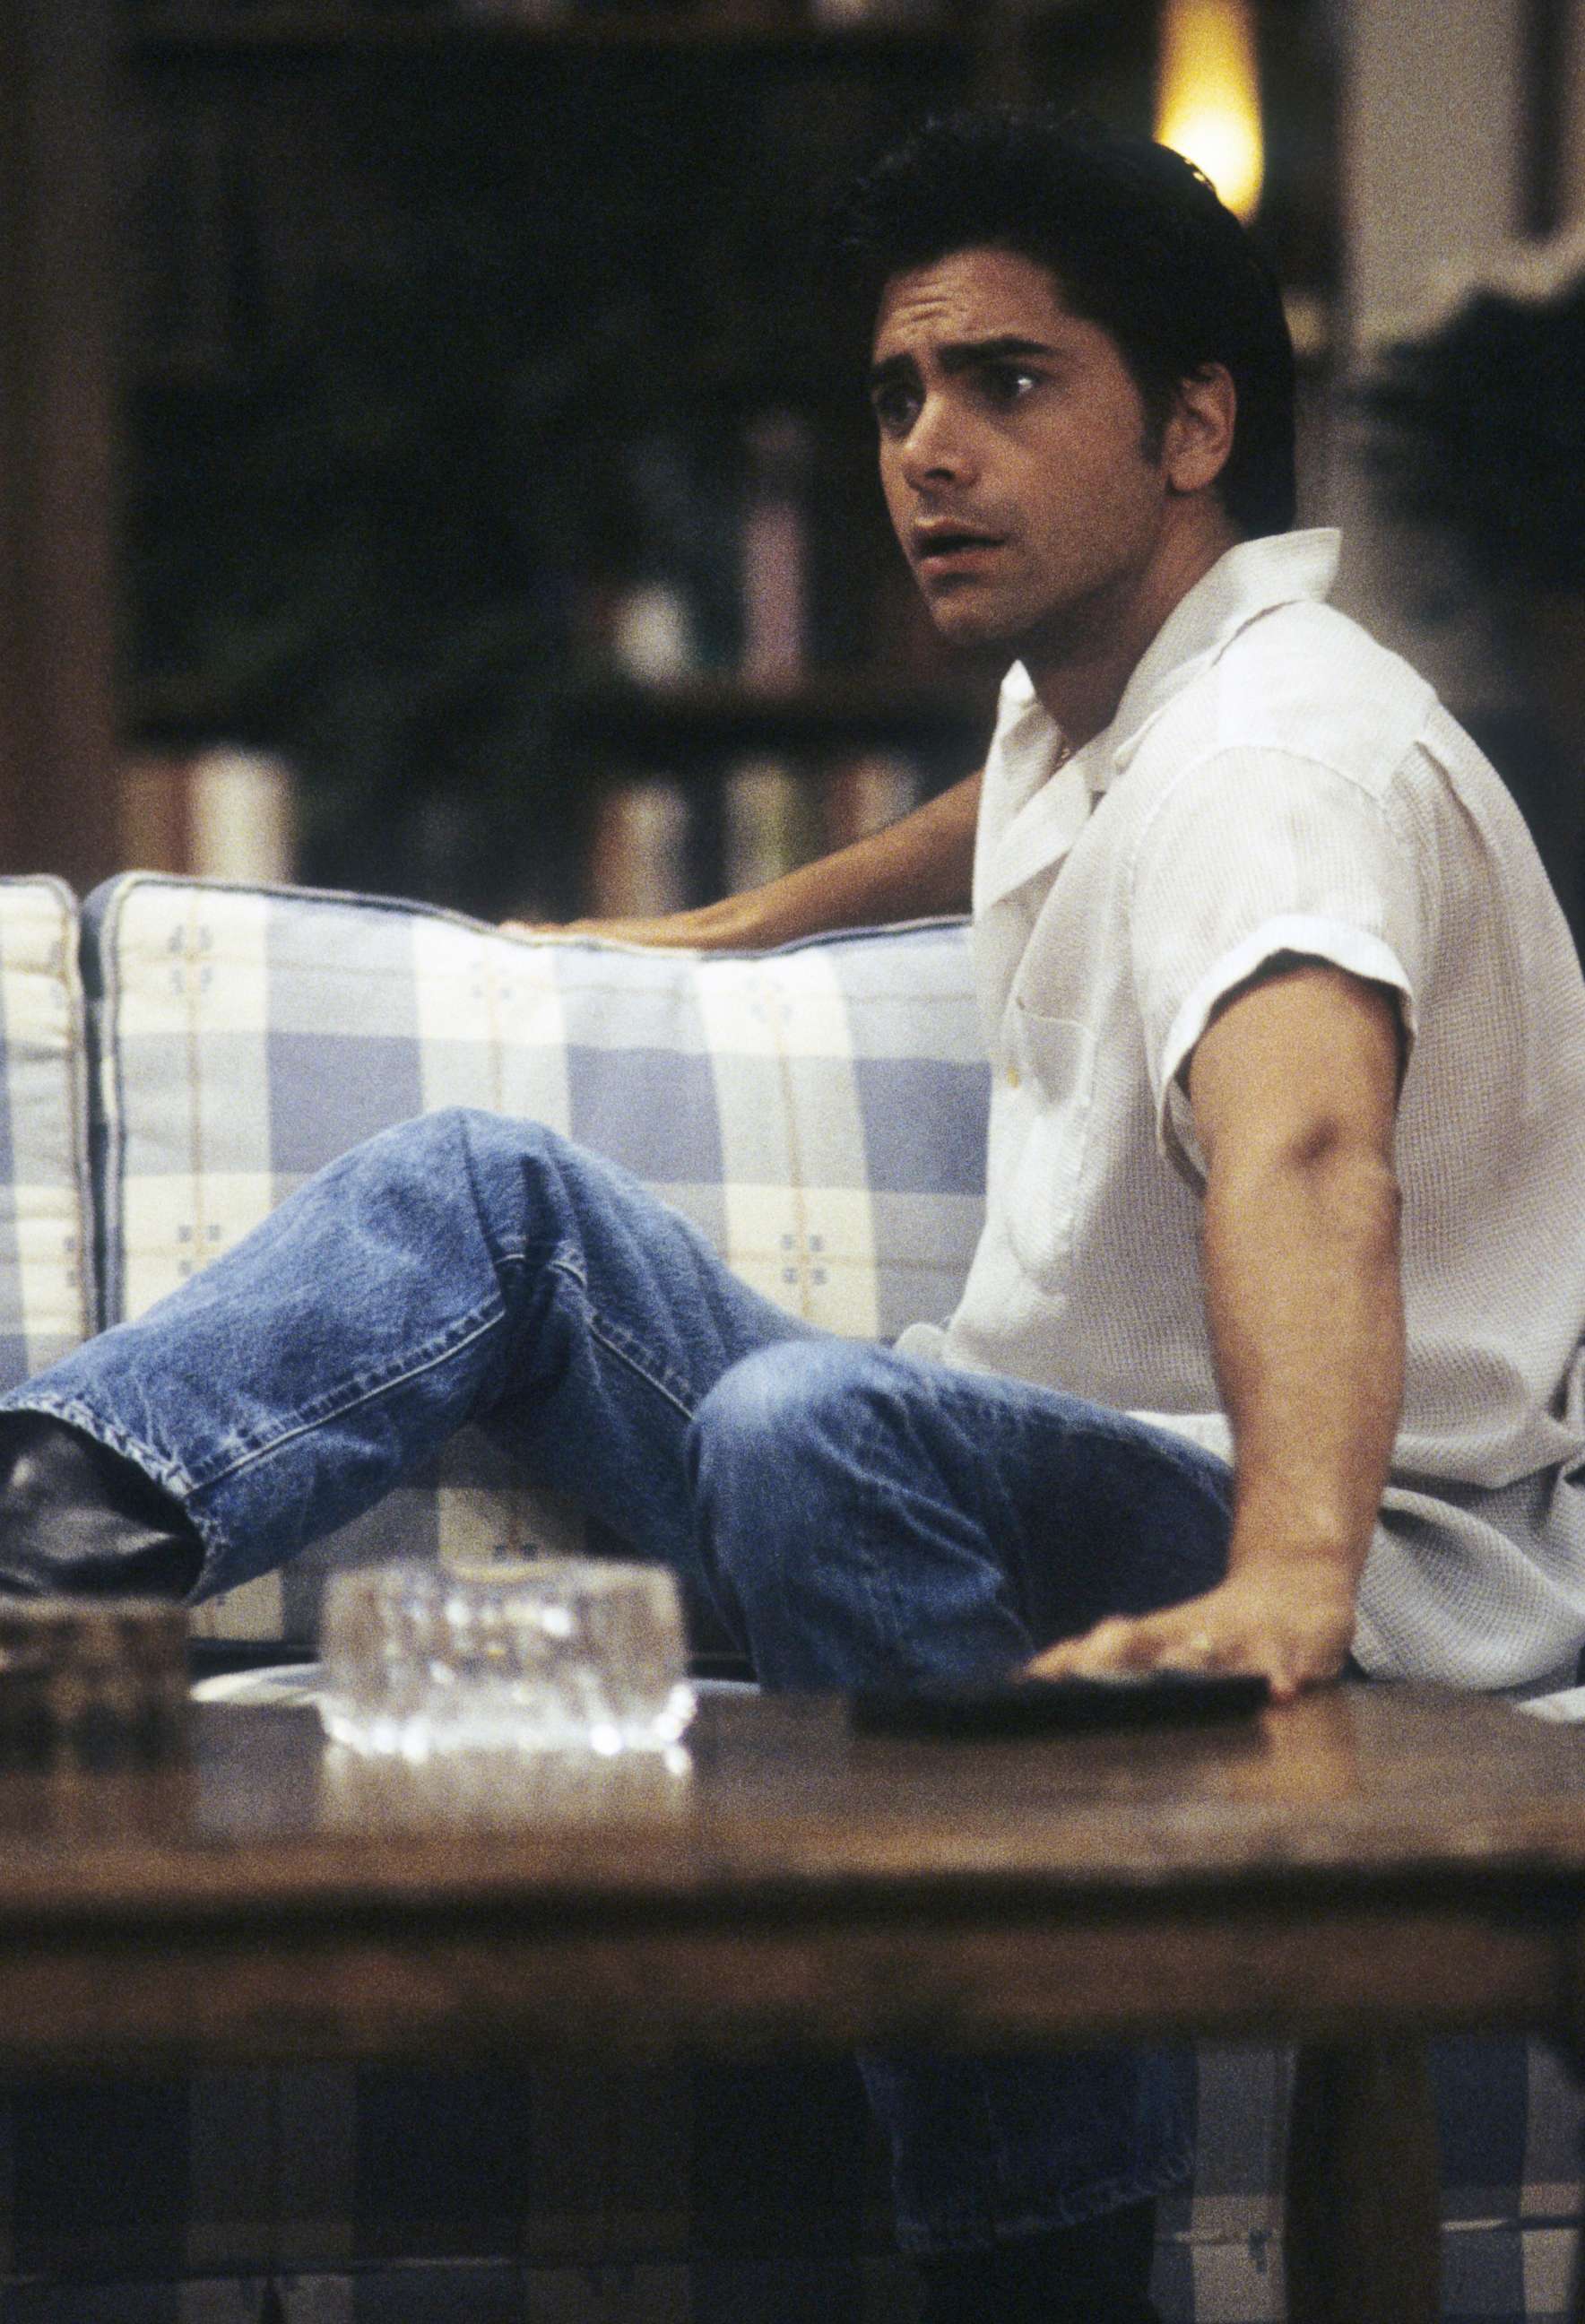 PHOTO: A scene from the TV show "Full House," Oct. 11, 1994.